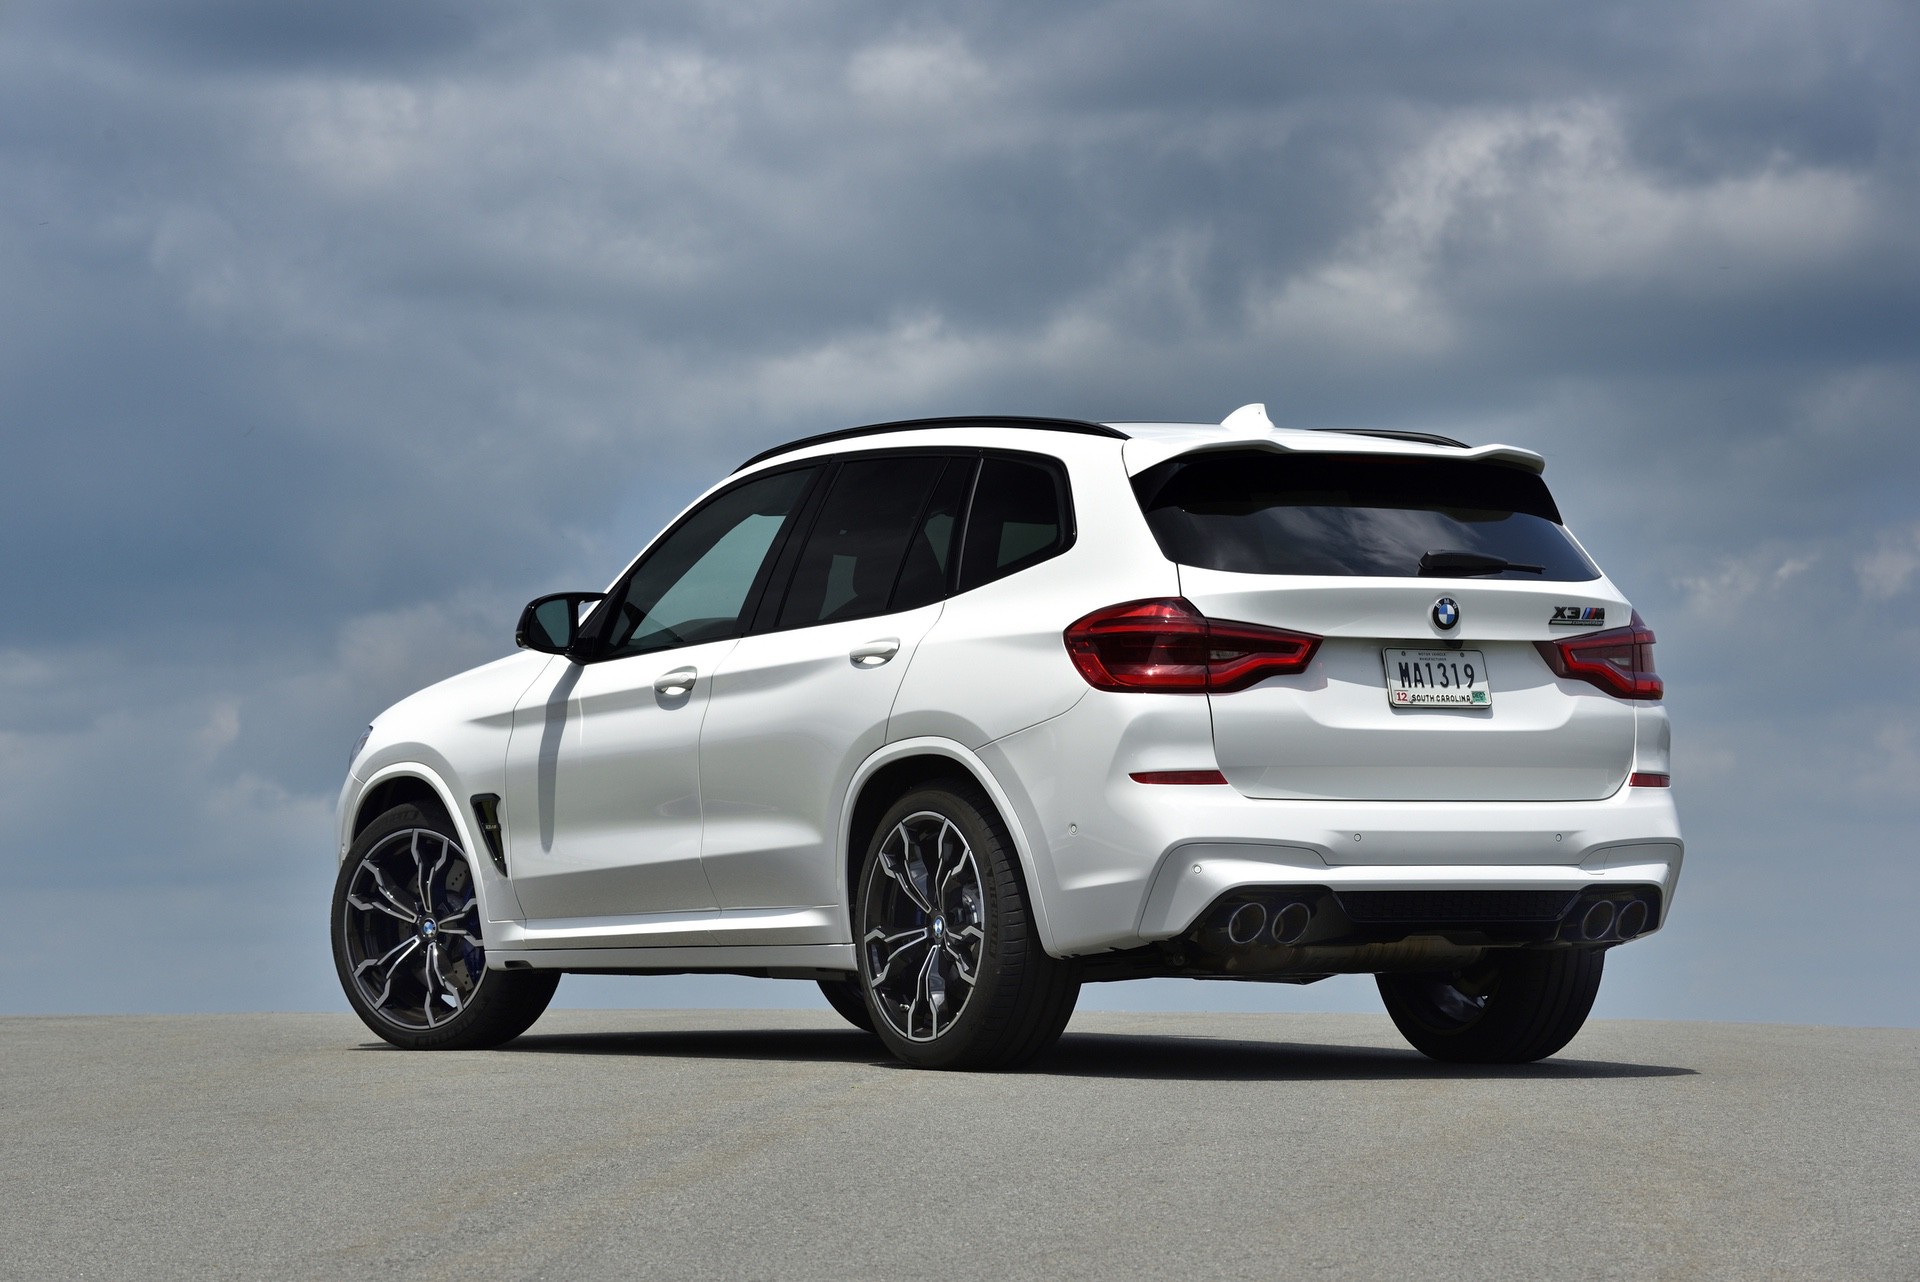 BMW X3 M expected to be the best-selling M Division product